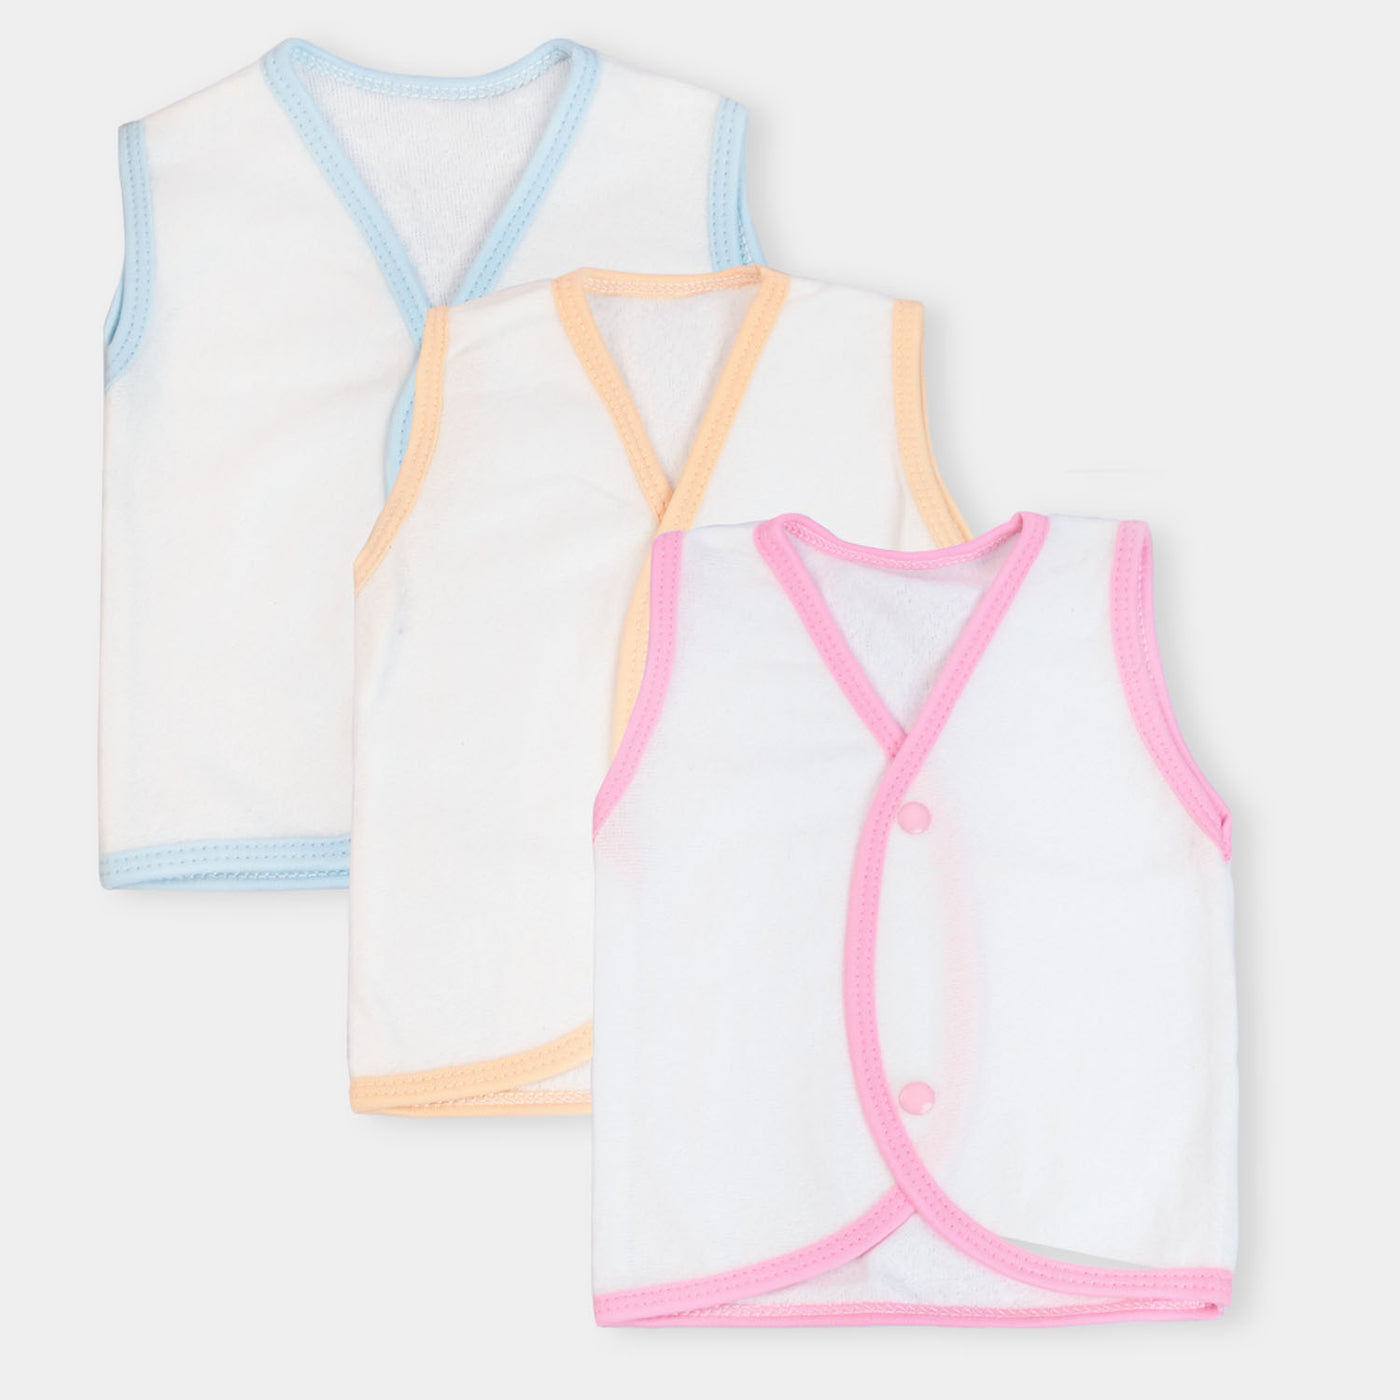 Baby Warm Vest Sando Small Pack of 3